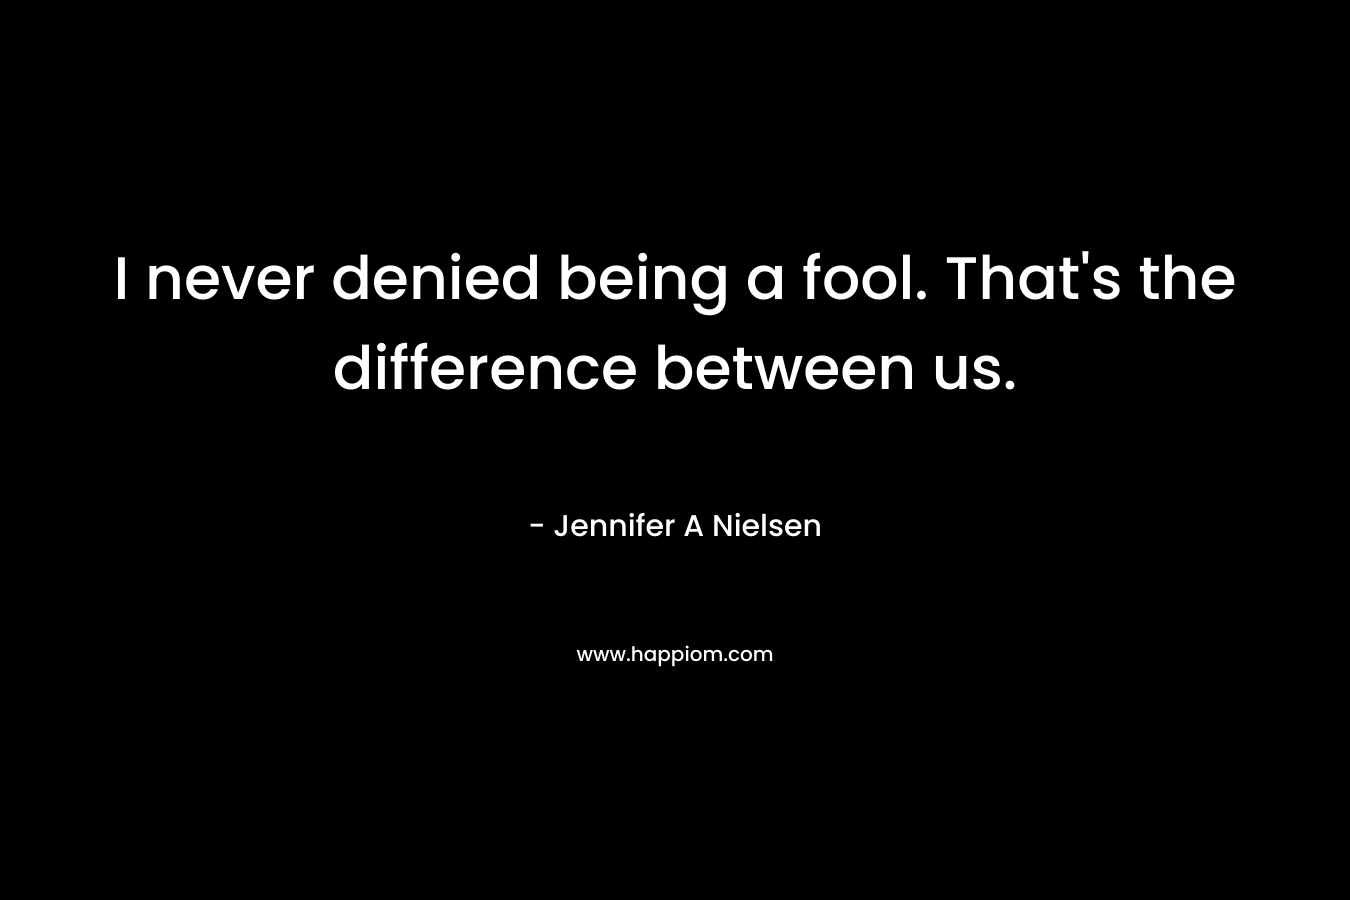 I never denied being a fool. That’s the difference between us. – Jennifer A Nielsen